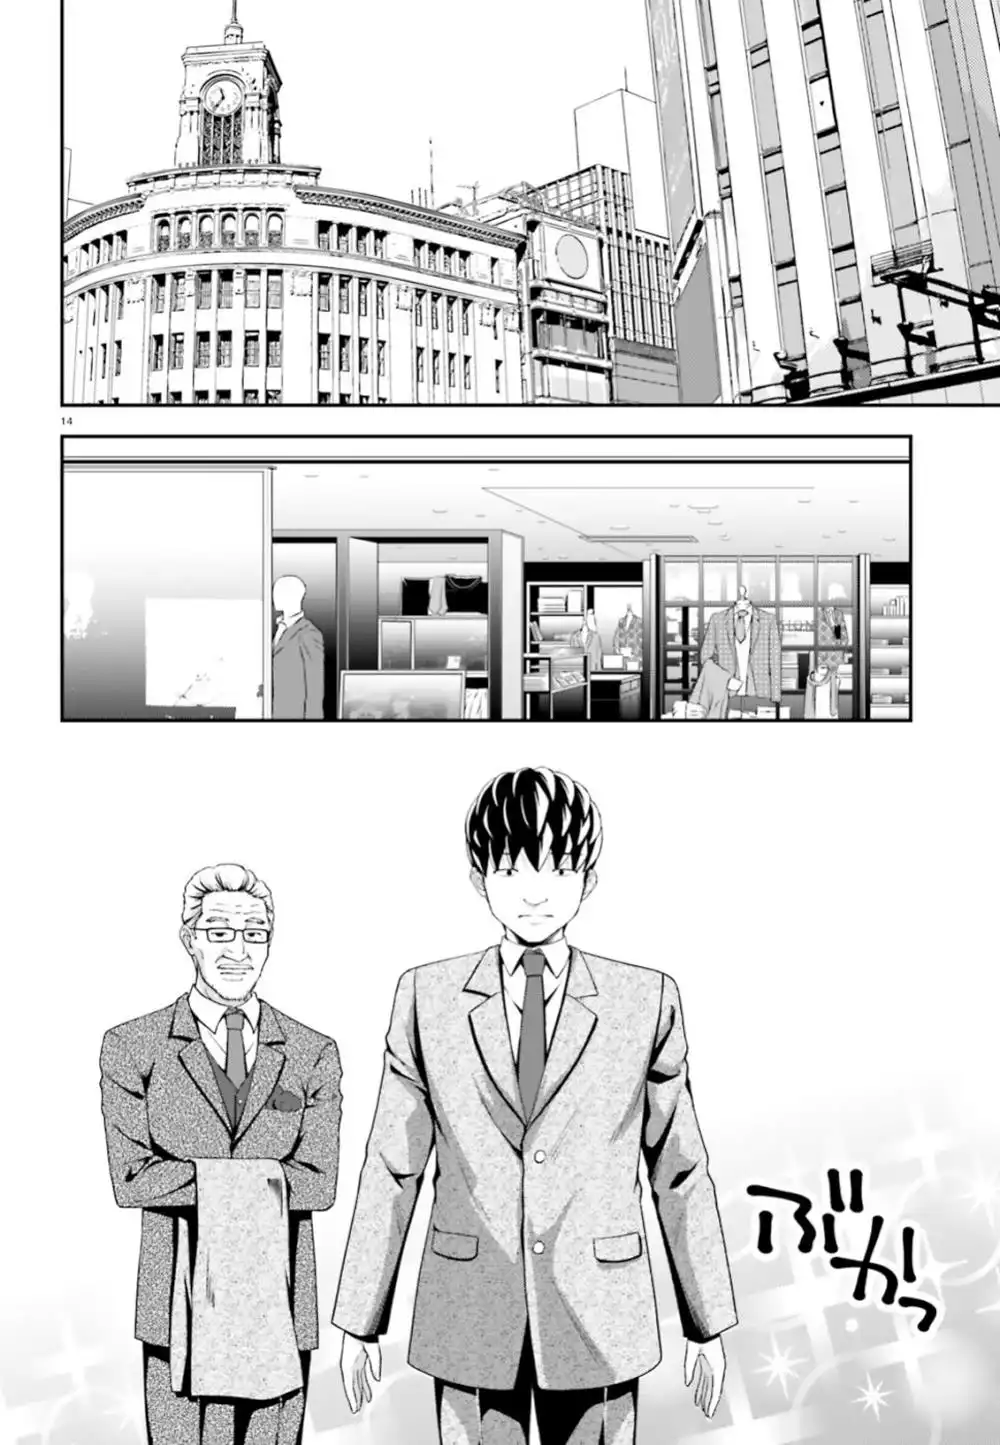 Nishino ~ The Boy At The Bottom Of The School Caste And Also At The Top Of The Underground Chapter 6